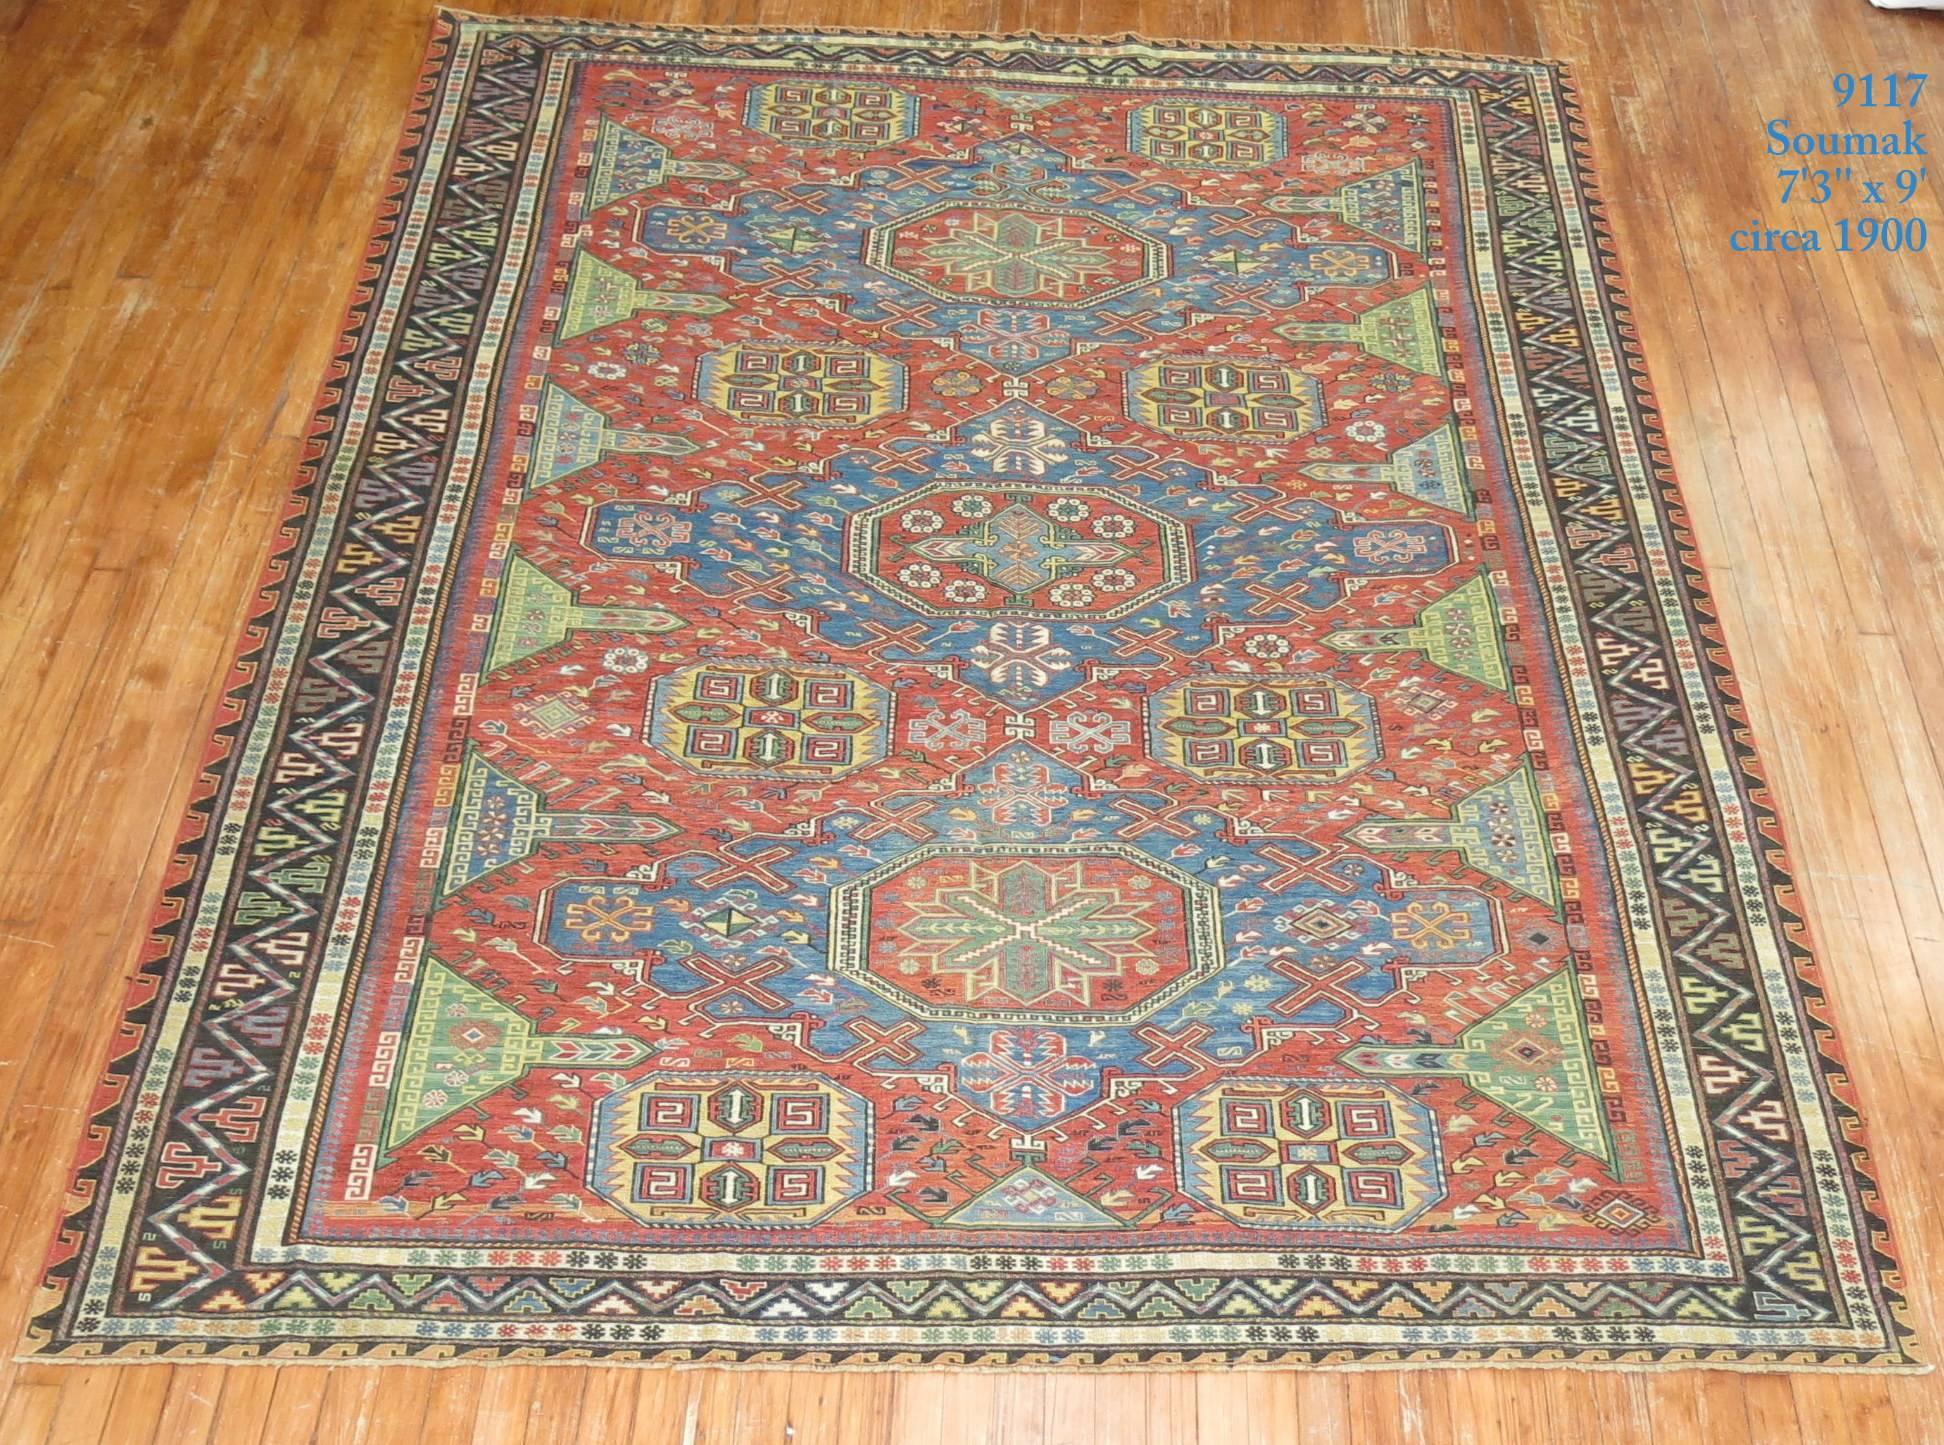 Breathtaking room size Soumak rug acquired from a private collection in NYC. Highlighted by lovely blues and green on a rusty red ground.

Soumak rugs have a construction technique that produce a flat-weave rug that is relatively thick, strong and